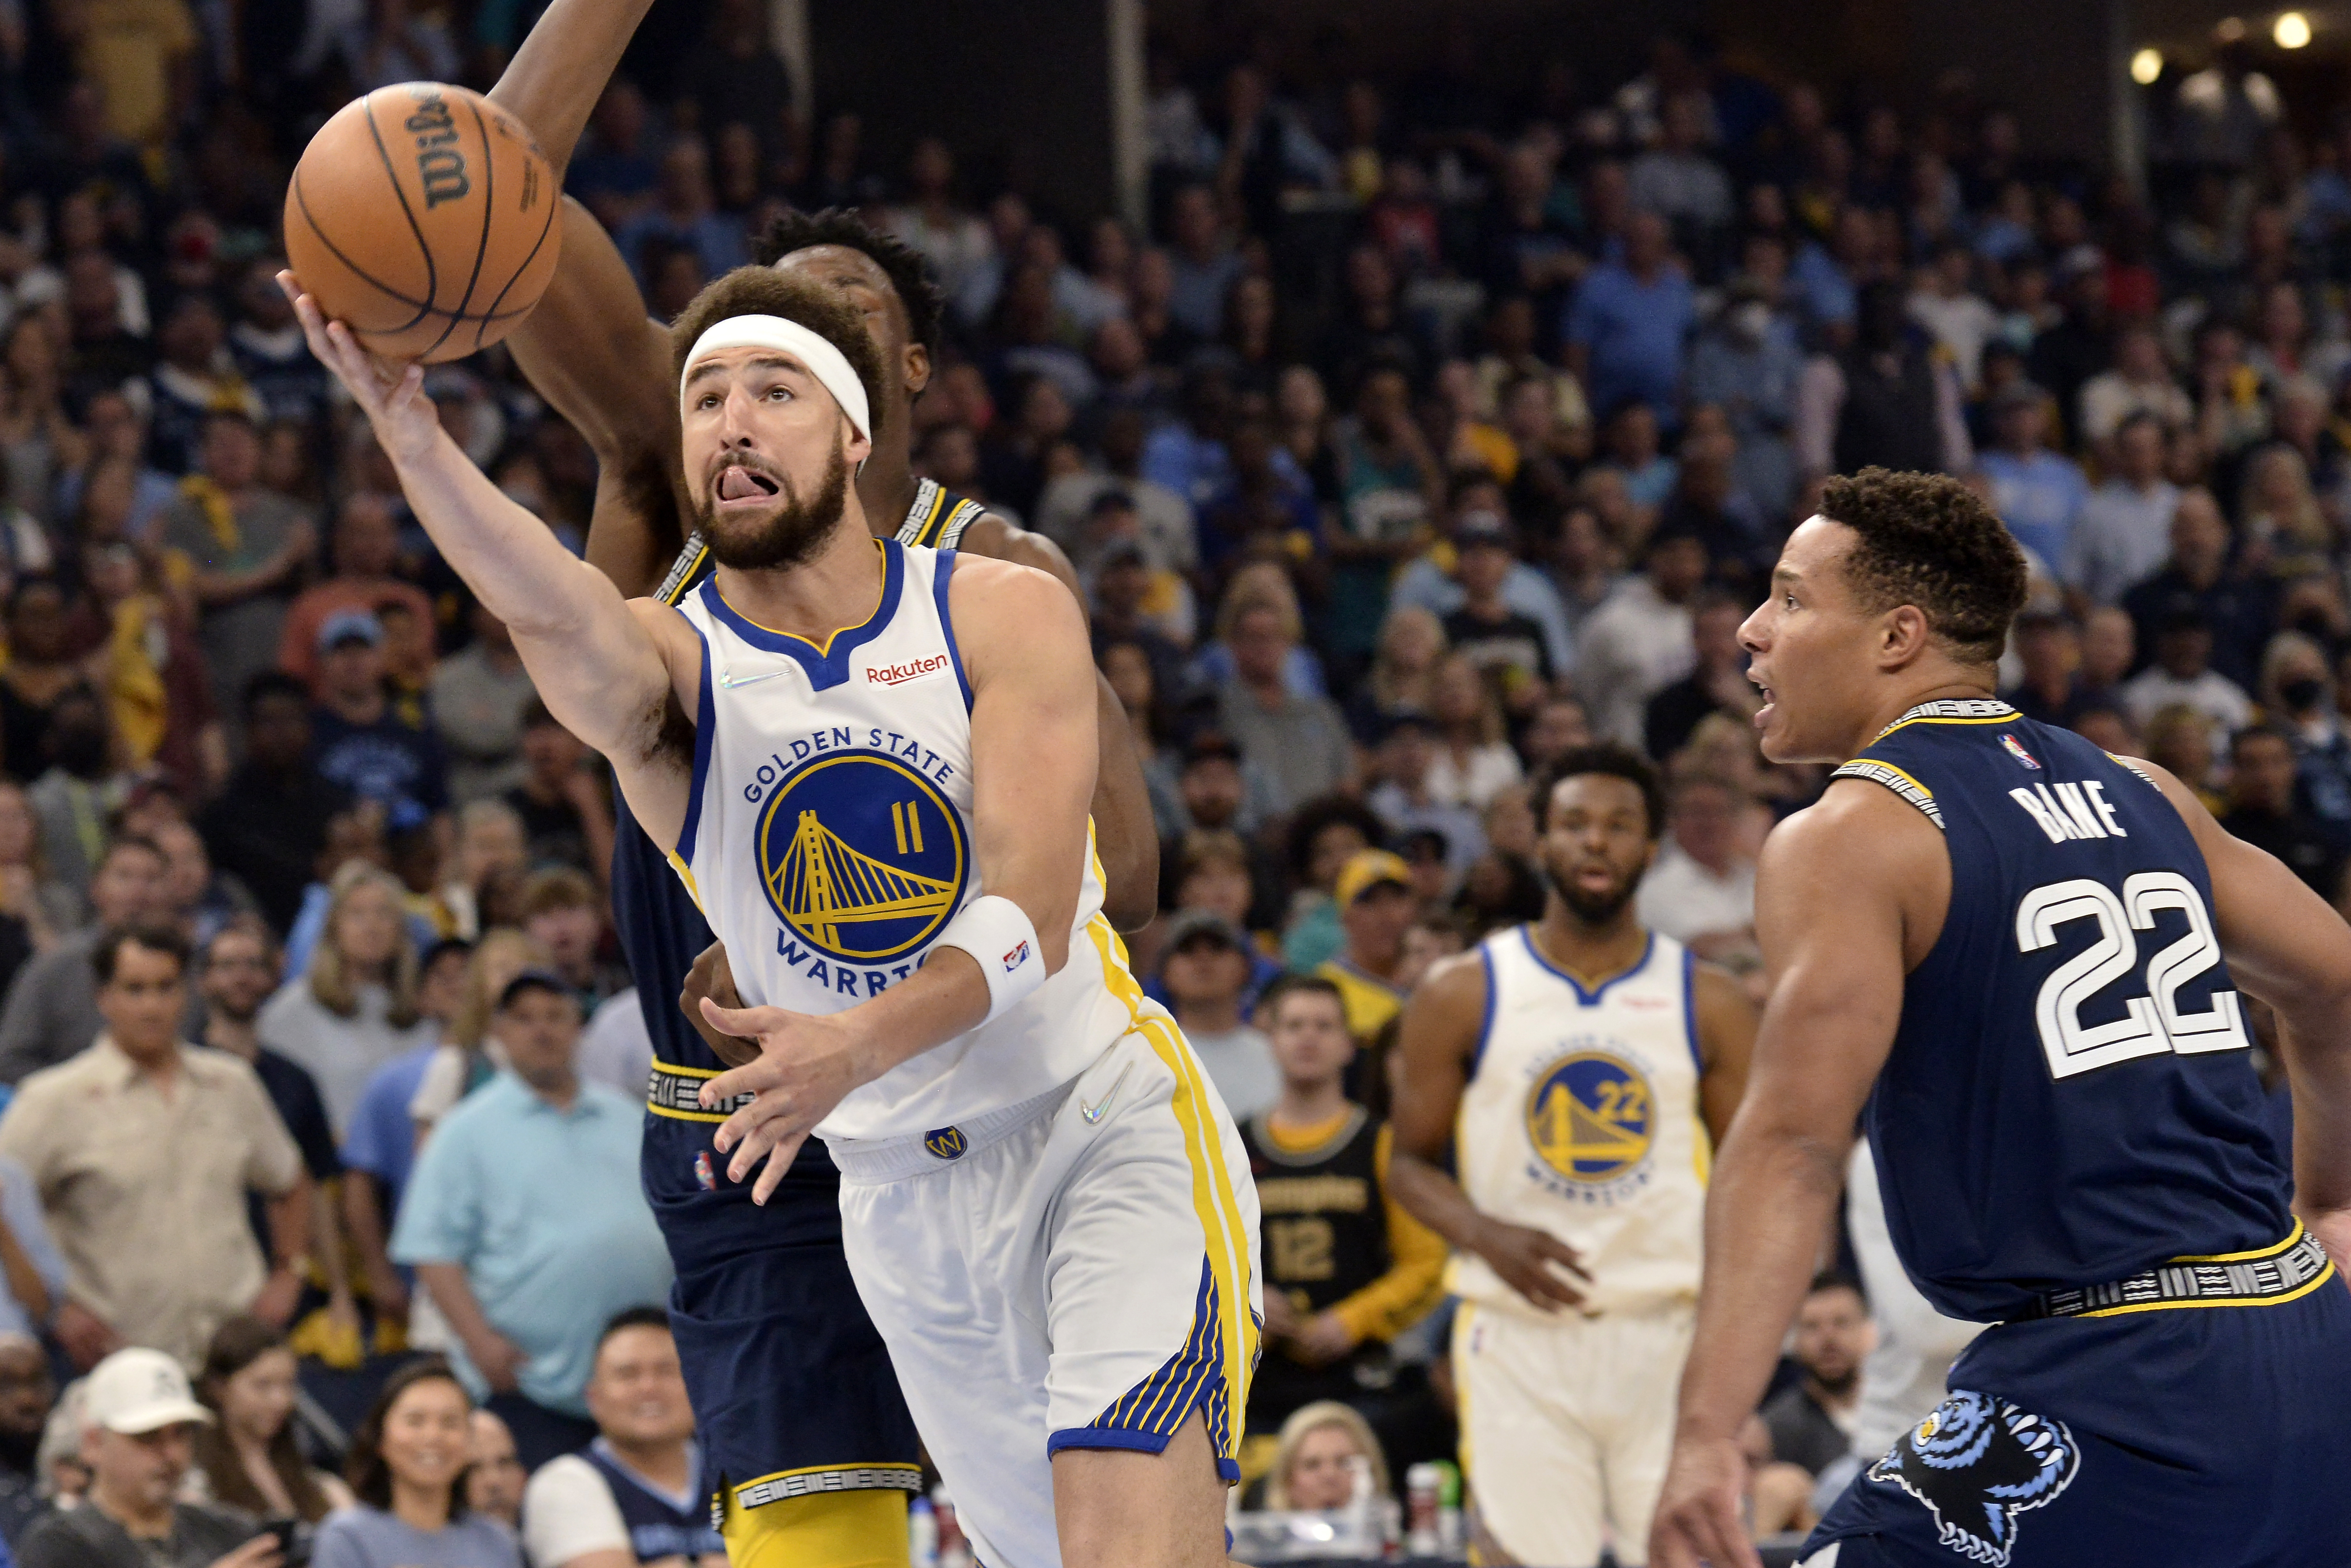 Memphis vs Golden State: Ja Morant carries Grizzlies to victory with 'one  good eye' as Kerr calls out 'dirty' play